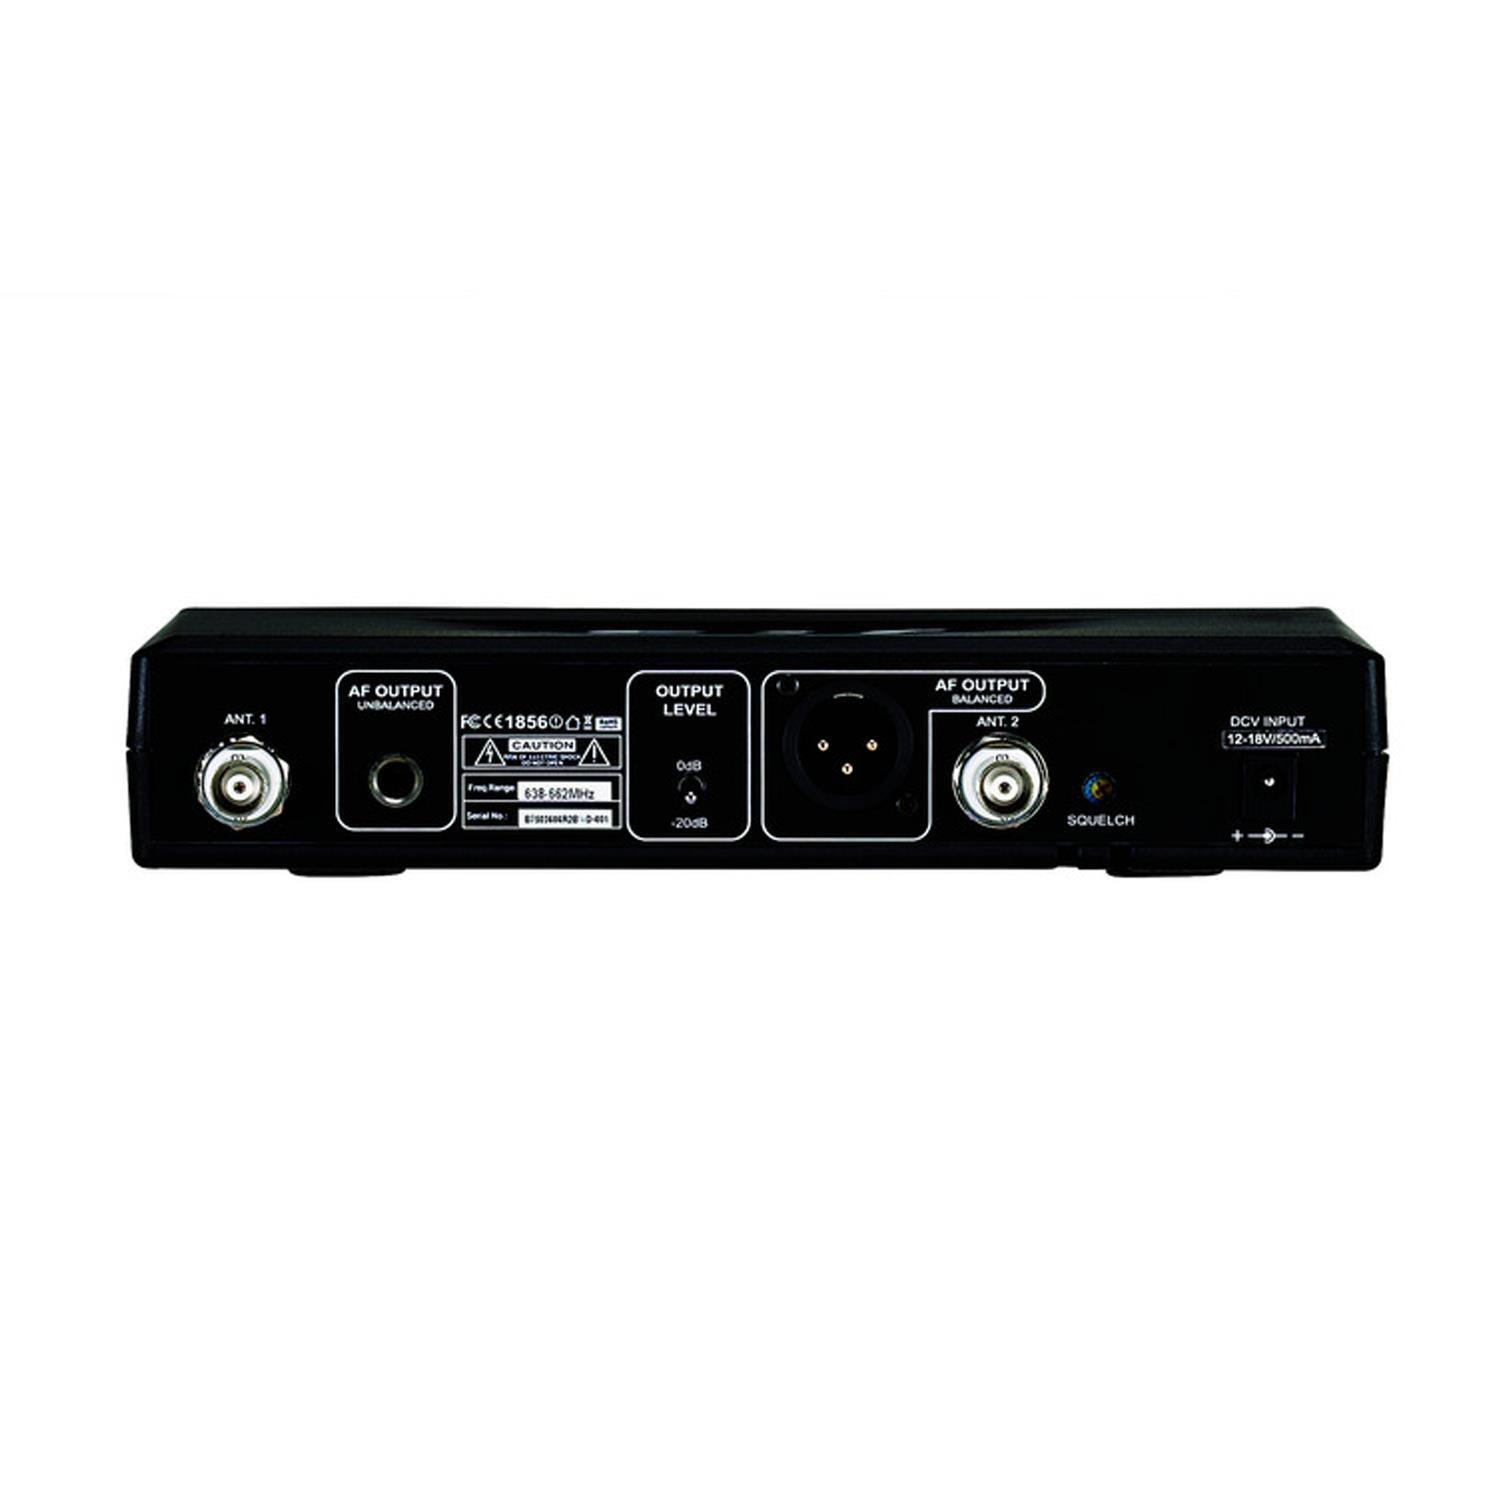 JTS IN-164R UHF PLL Single Channel Diversity Wireless Receiver, 606.5-642MHz - DY Pro Audio